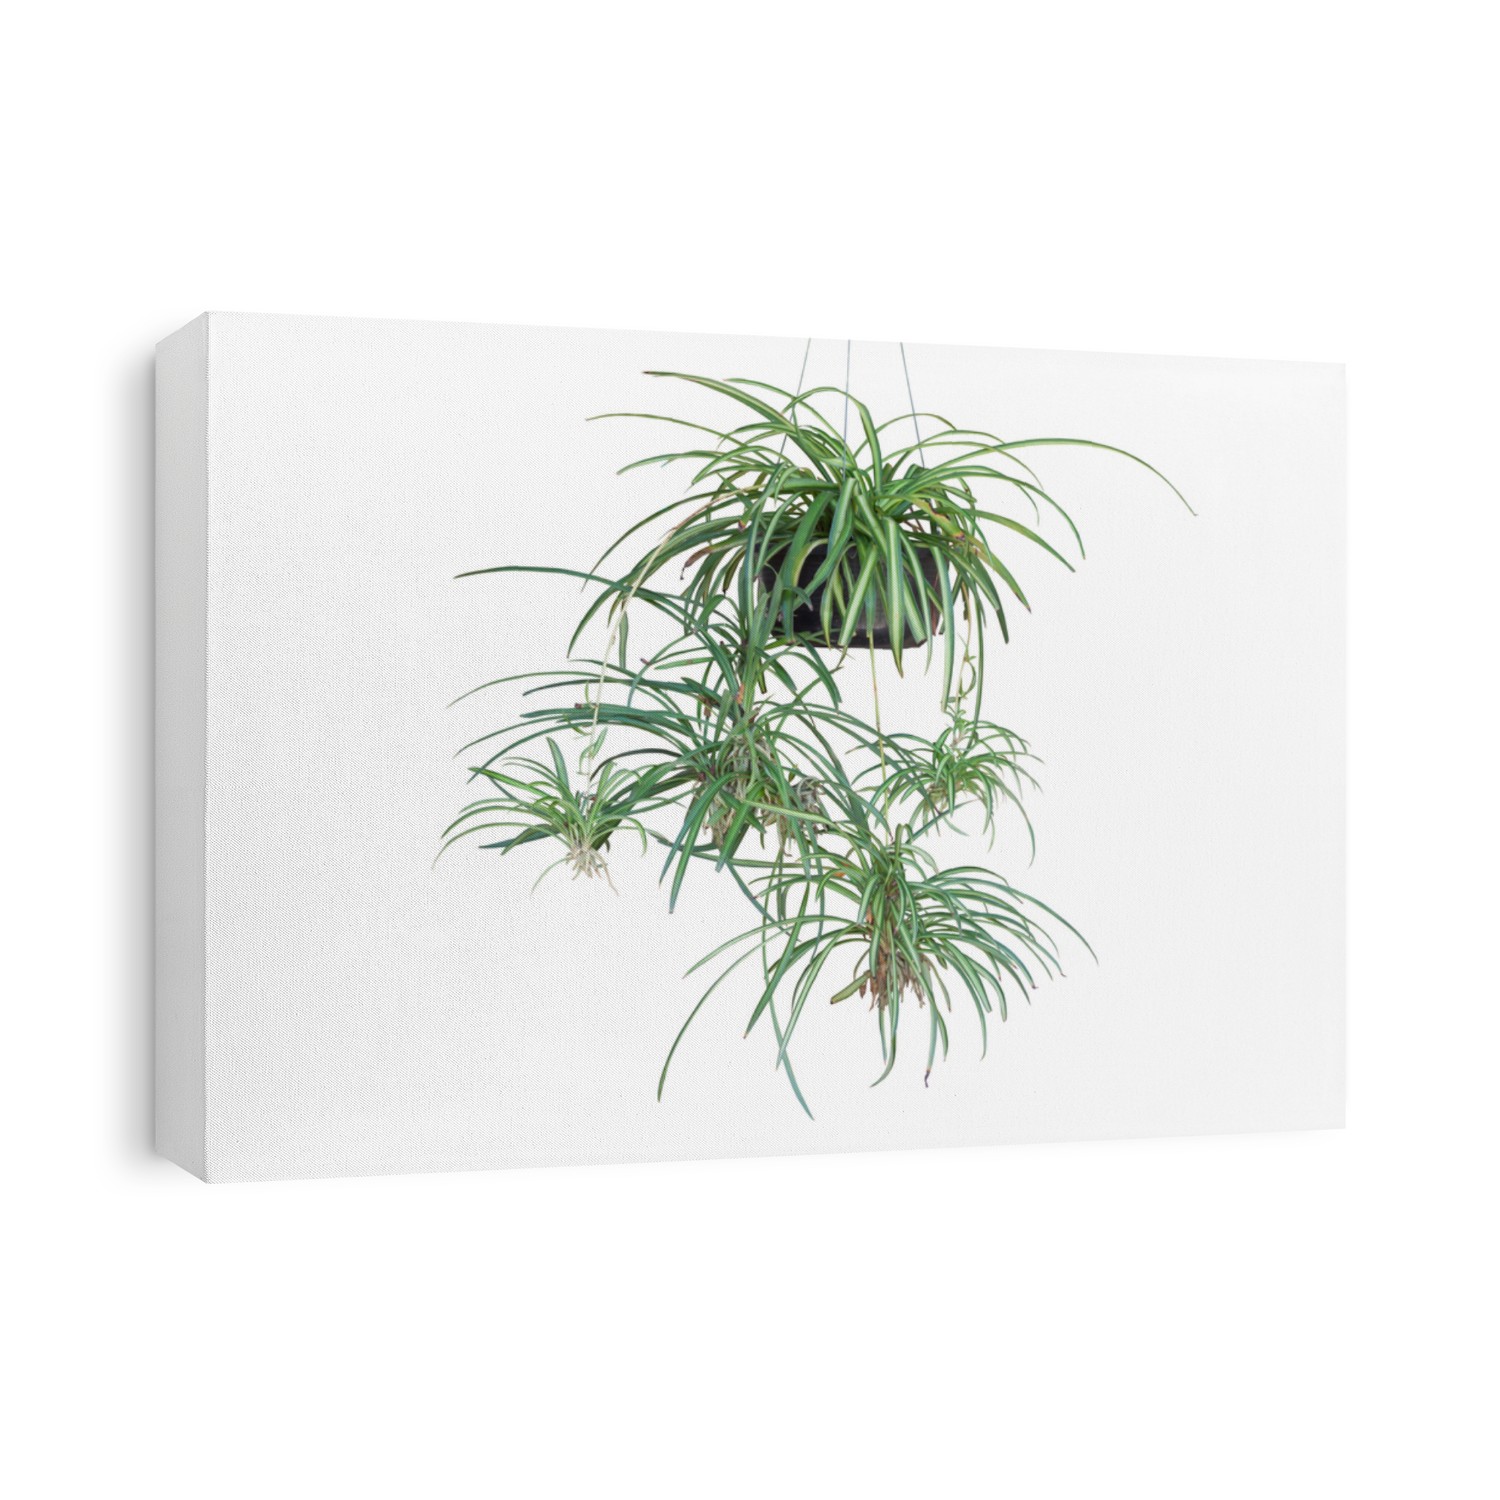 Spider Plant or Chlorophytum bichetii (Karrer) Backer hanging in black plastic pot isolated on white background included clipping path.